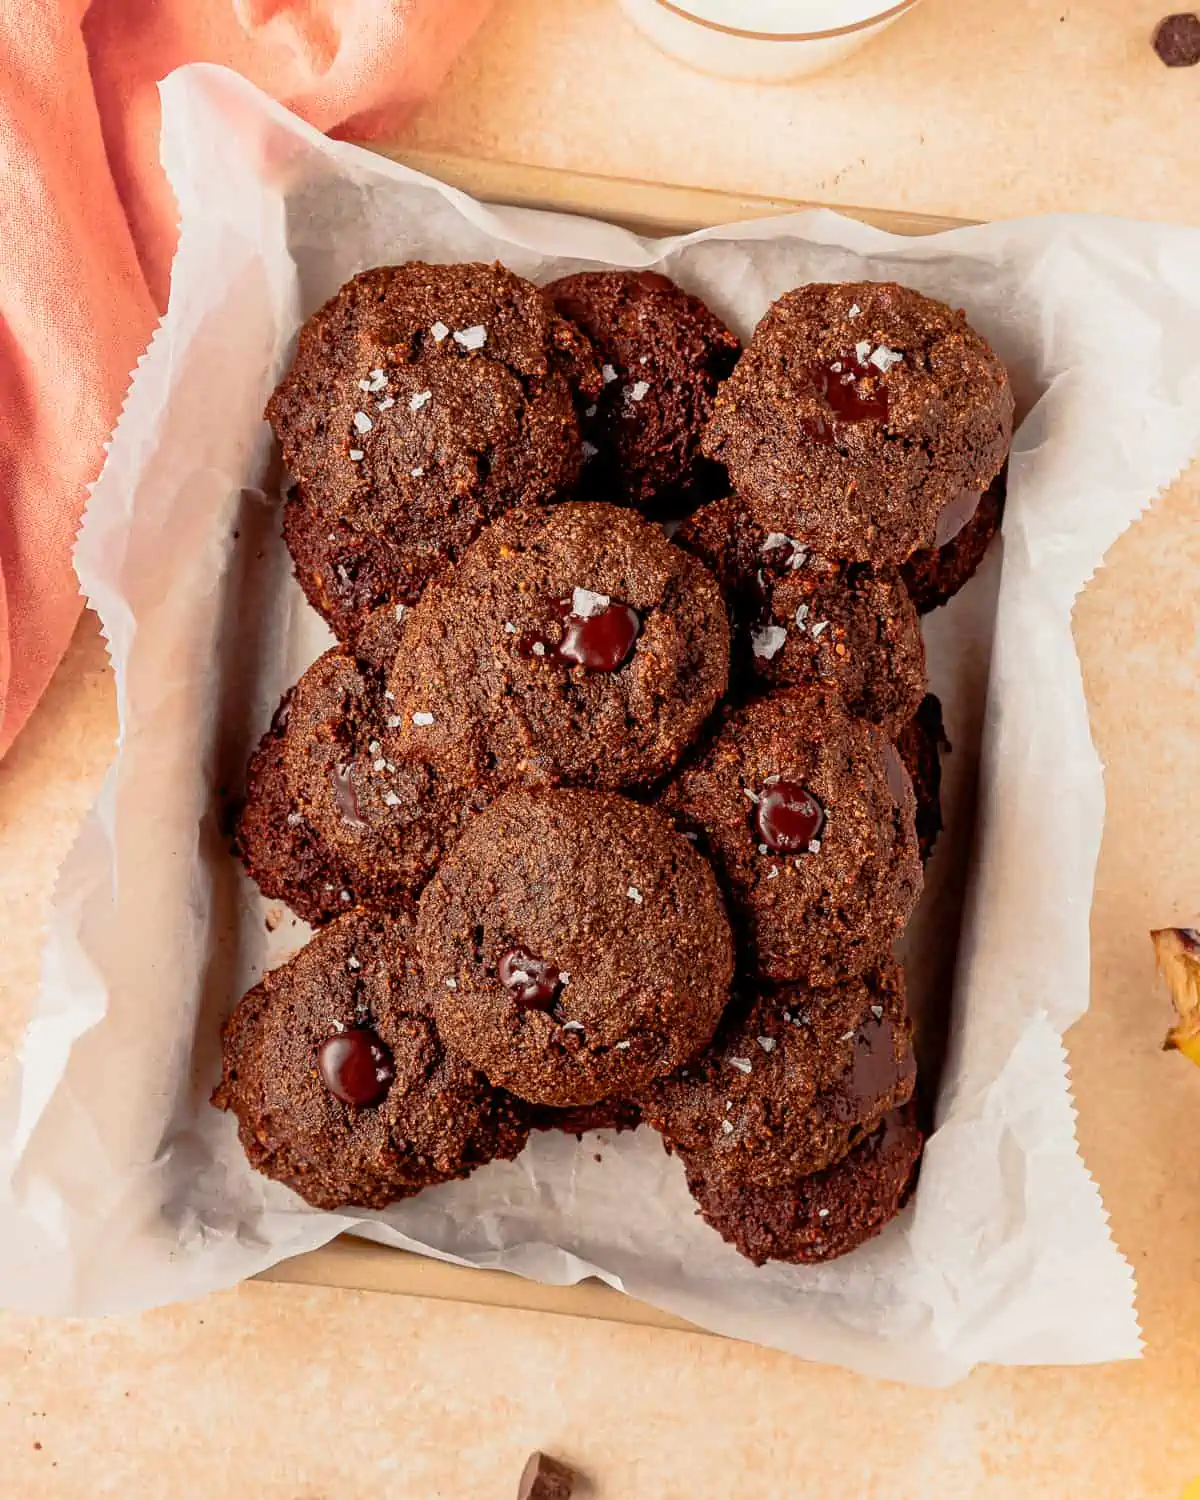 Banana Chocolate Cookies in a pan with puddles of chocolate.